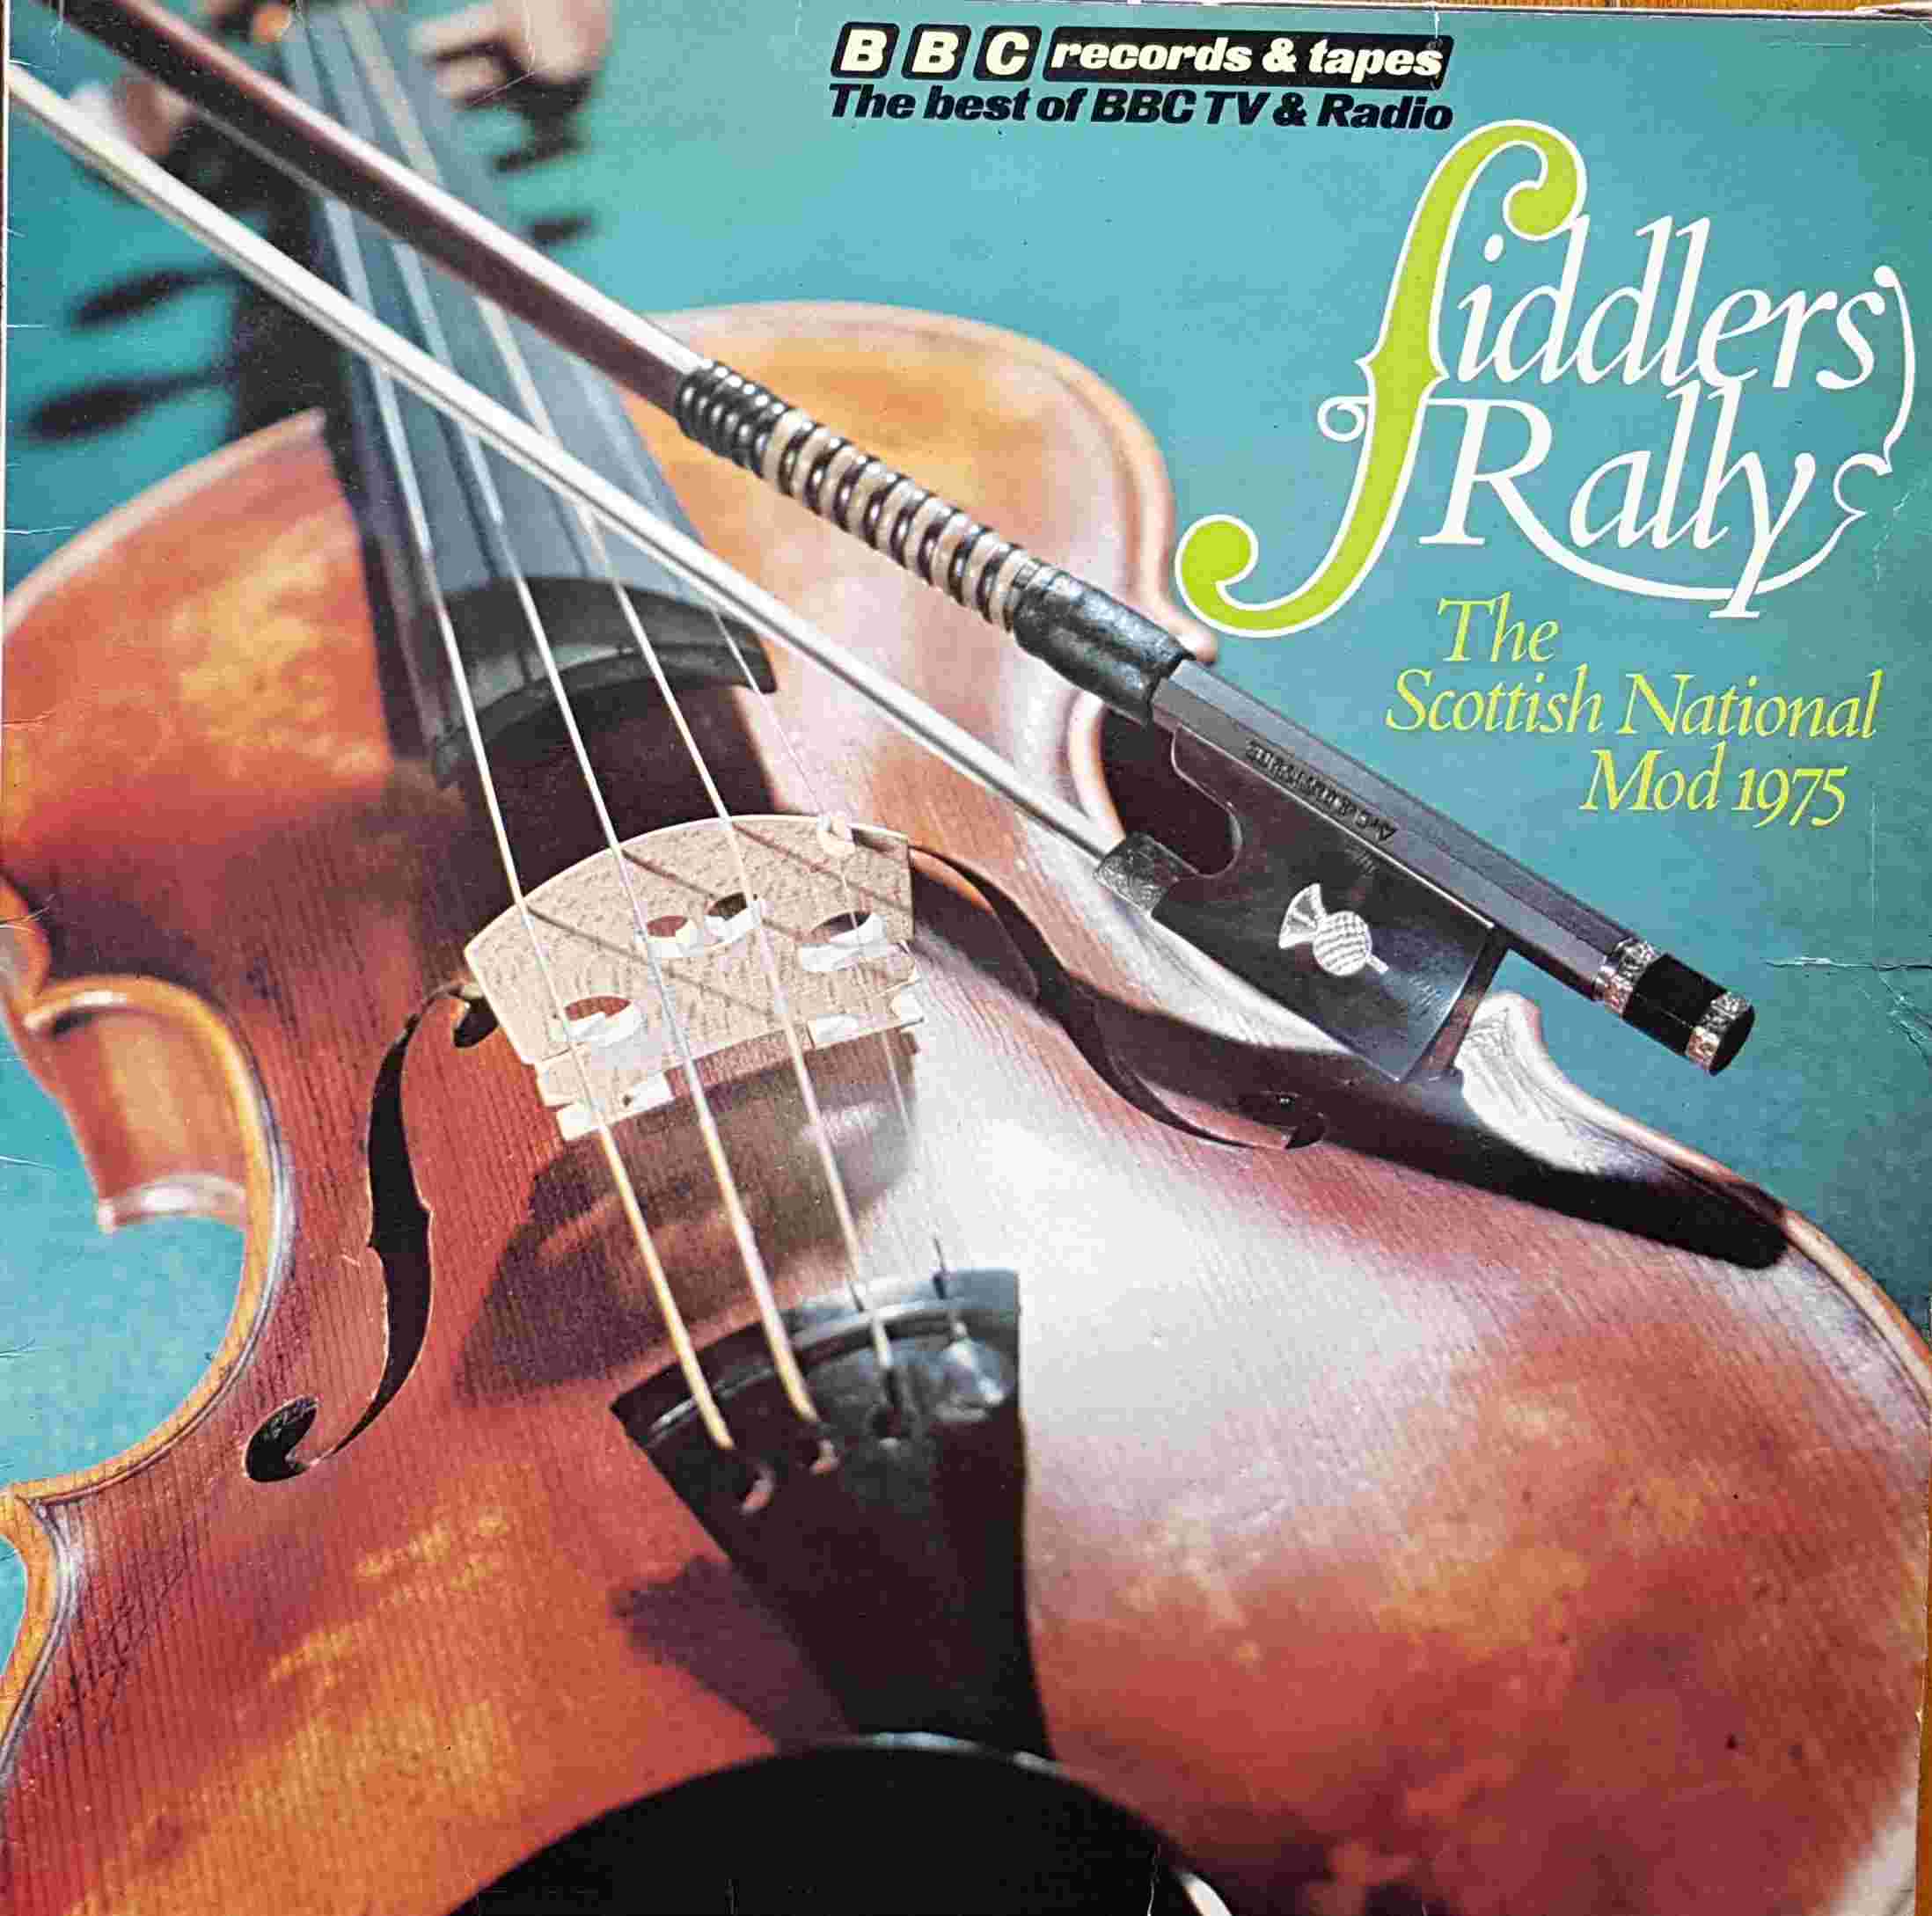 Picture of REC 231 Fiddlers' rally by artist Various from the BBC albums - Records and Tapes library